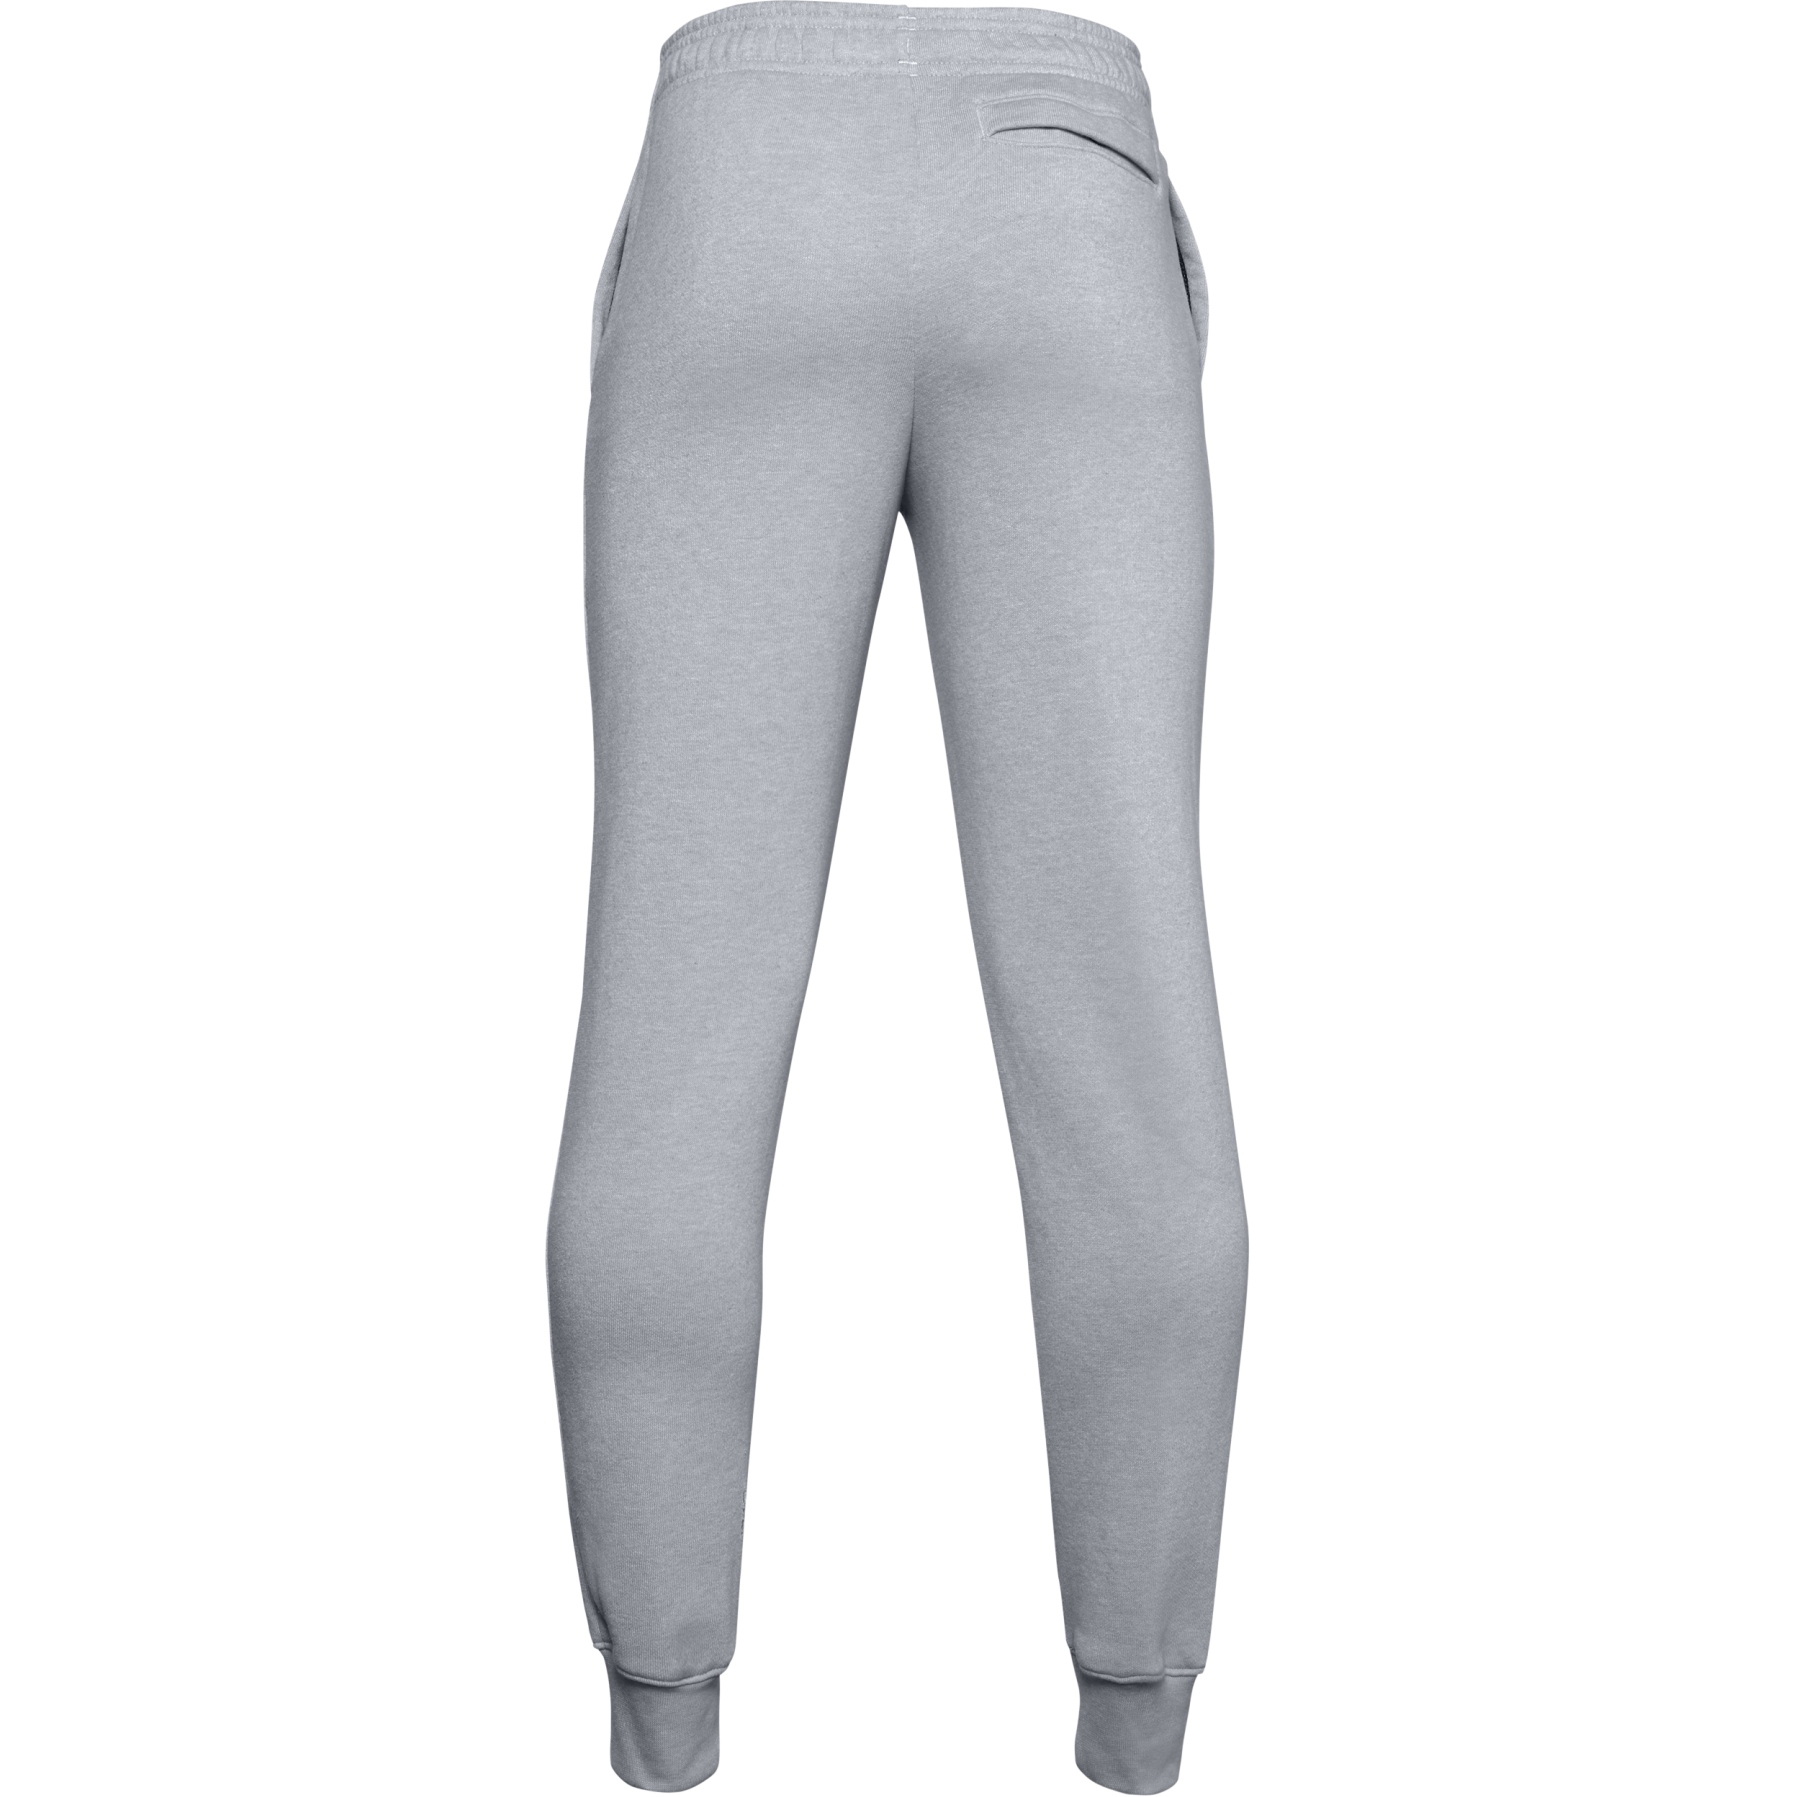 Under Armour Rival Cotton Joggers Pitch Gray/Onyx White